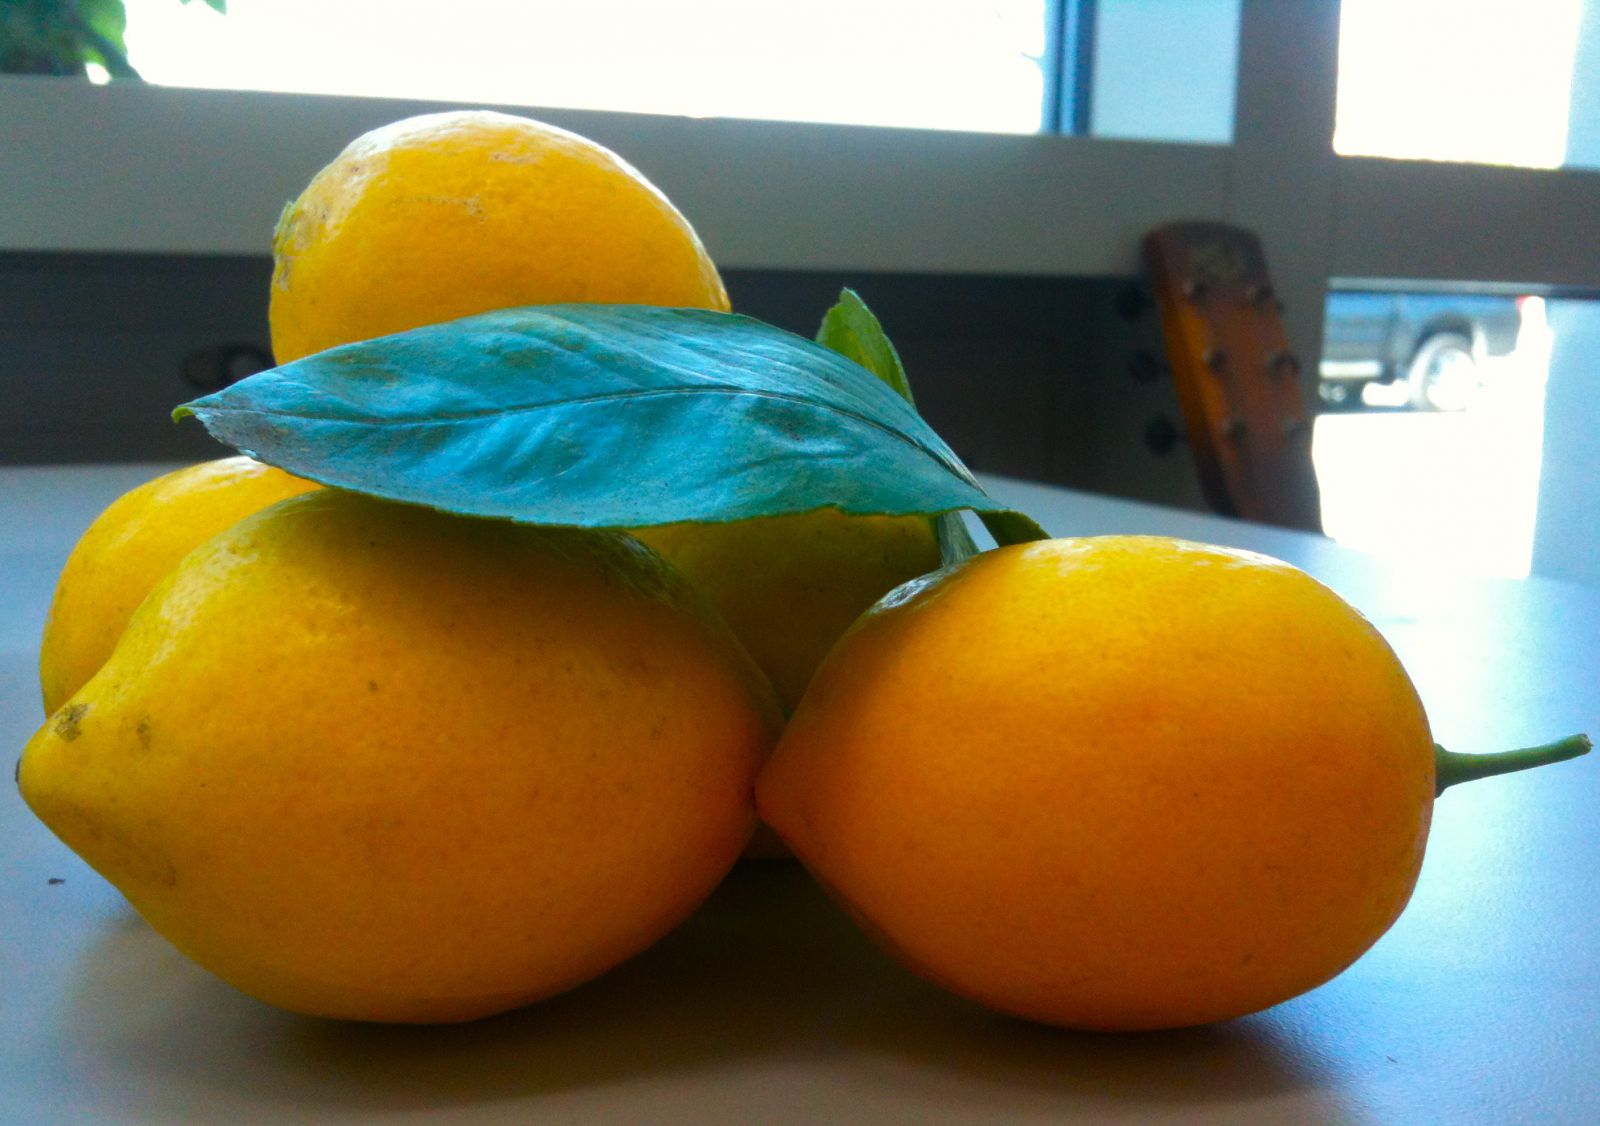 The day's bounty: lemons from down the road. Lemons and green tea are a powerful vice.